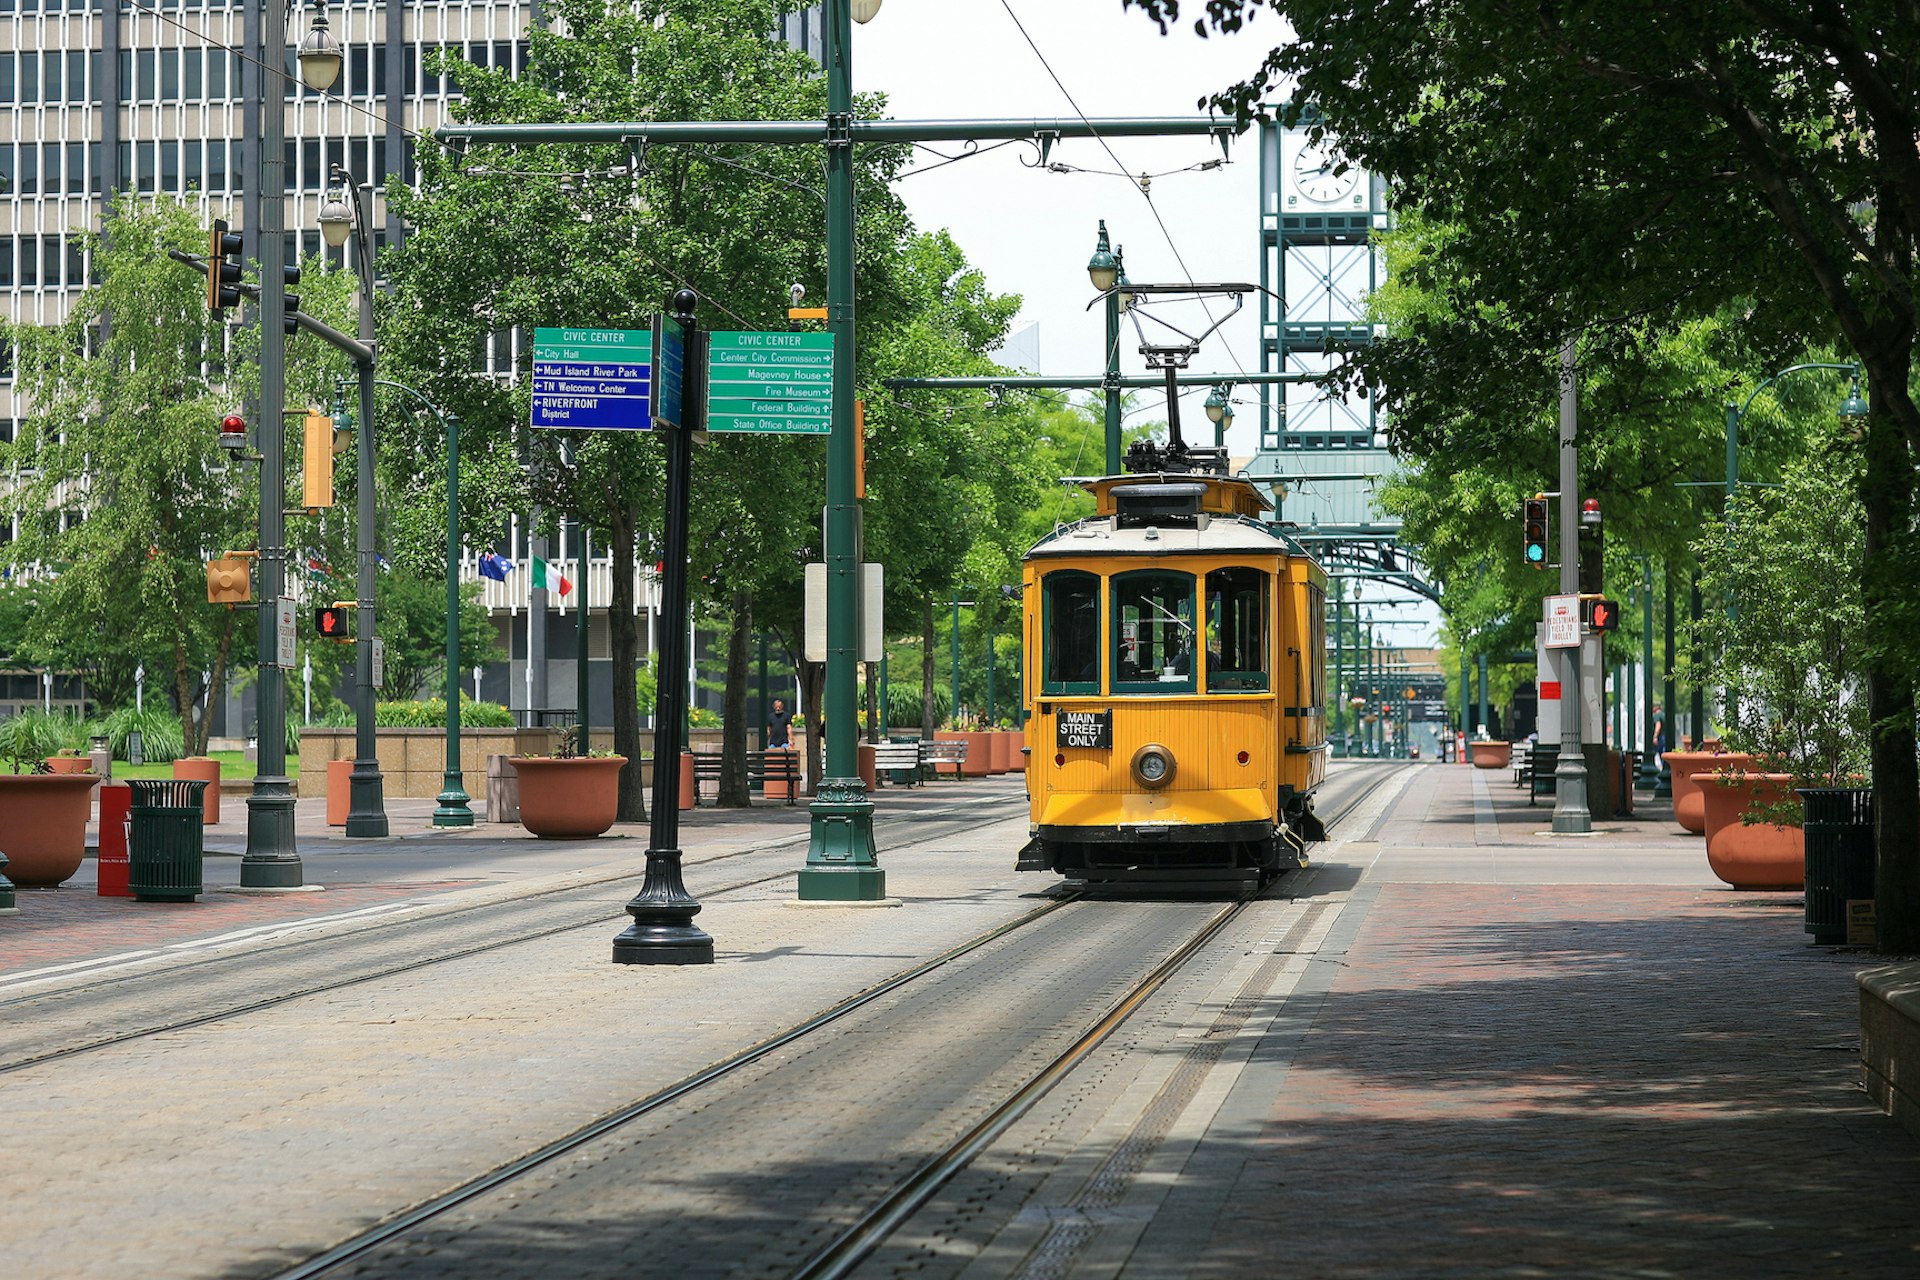 A yellow trolley on the street in Memphis, Tennessee